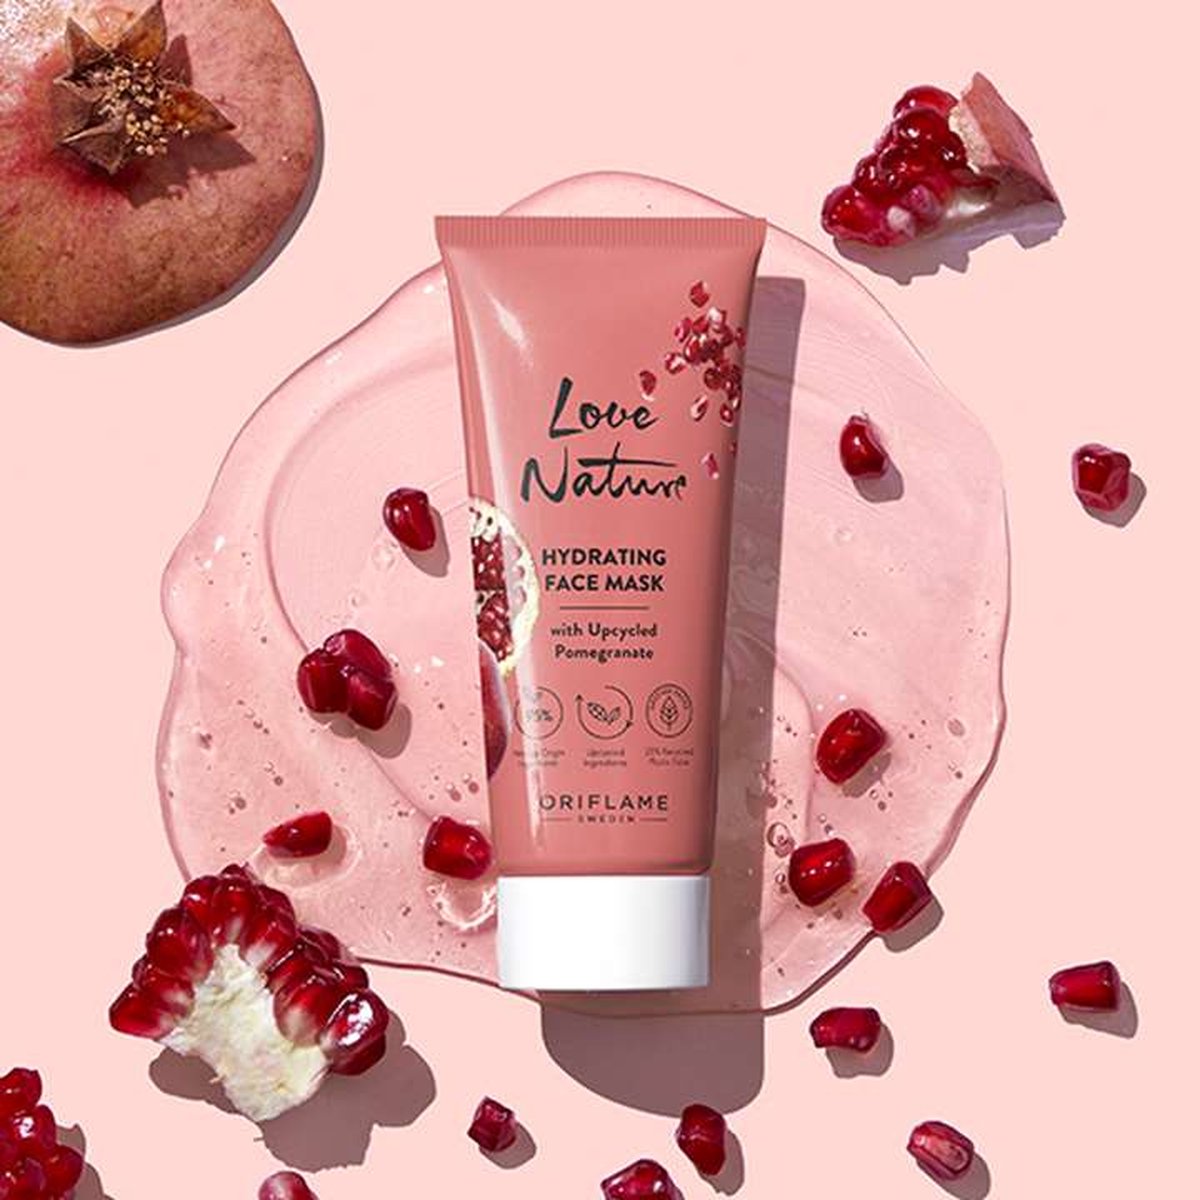 LOVE NATURE Hydrating Face Mask with Upcycled Pomegranate